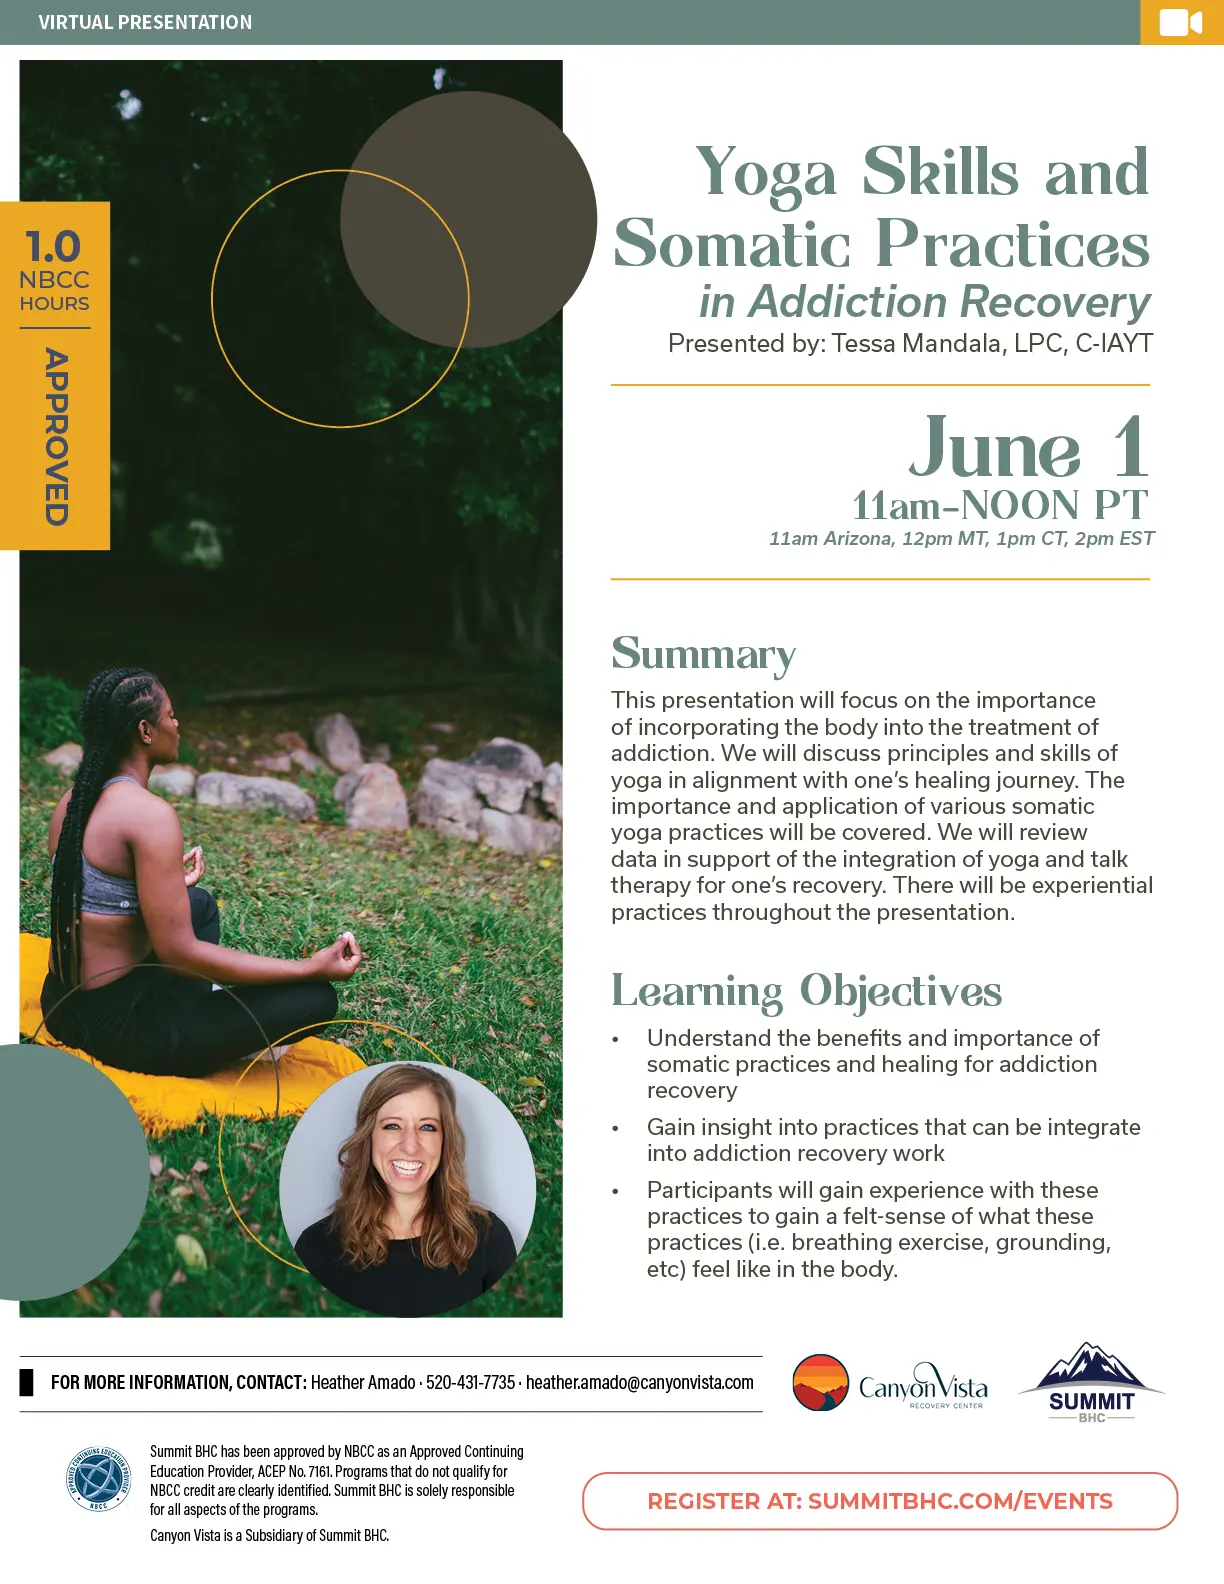 YOGA SKILLS AND SOMATIC PRACTICES IN ADDICTION RECOVERY - June 1, 2023 - Virtual Presentation